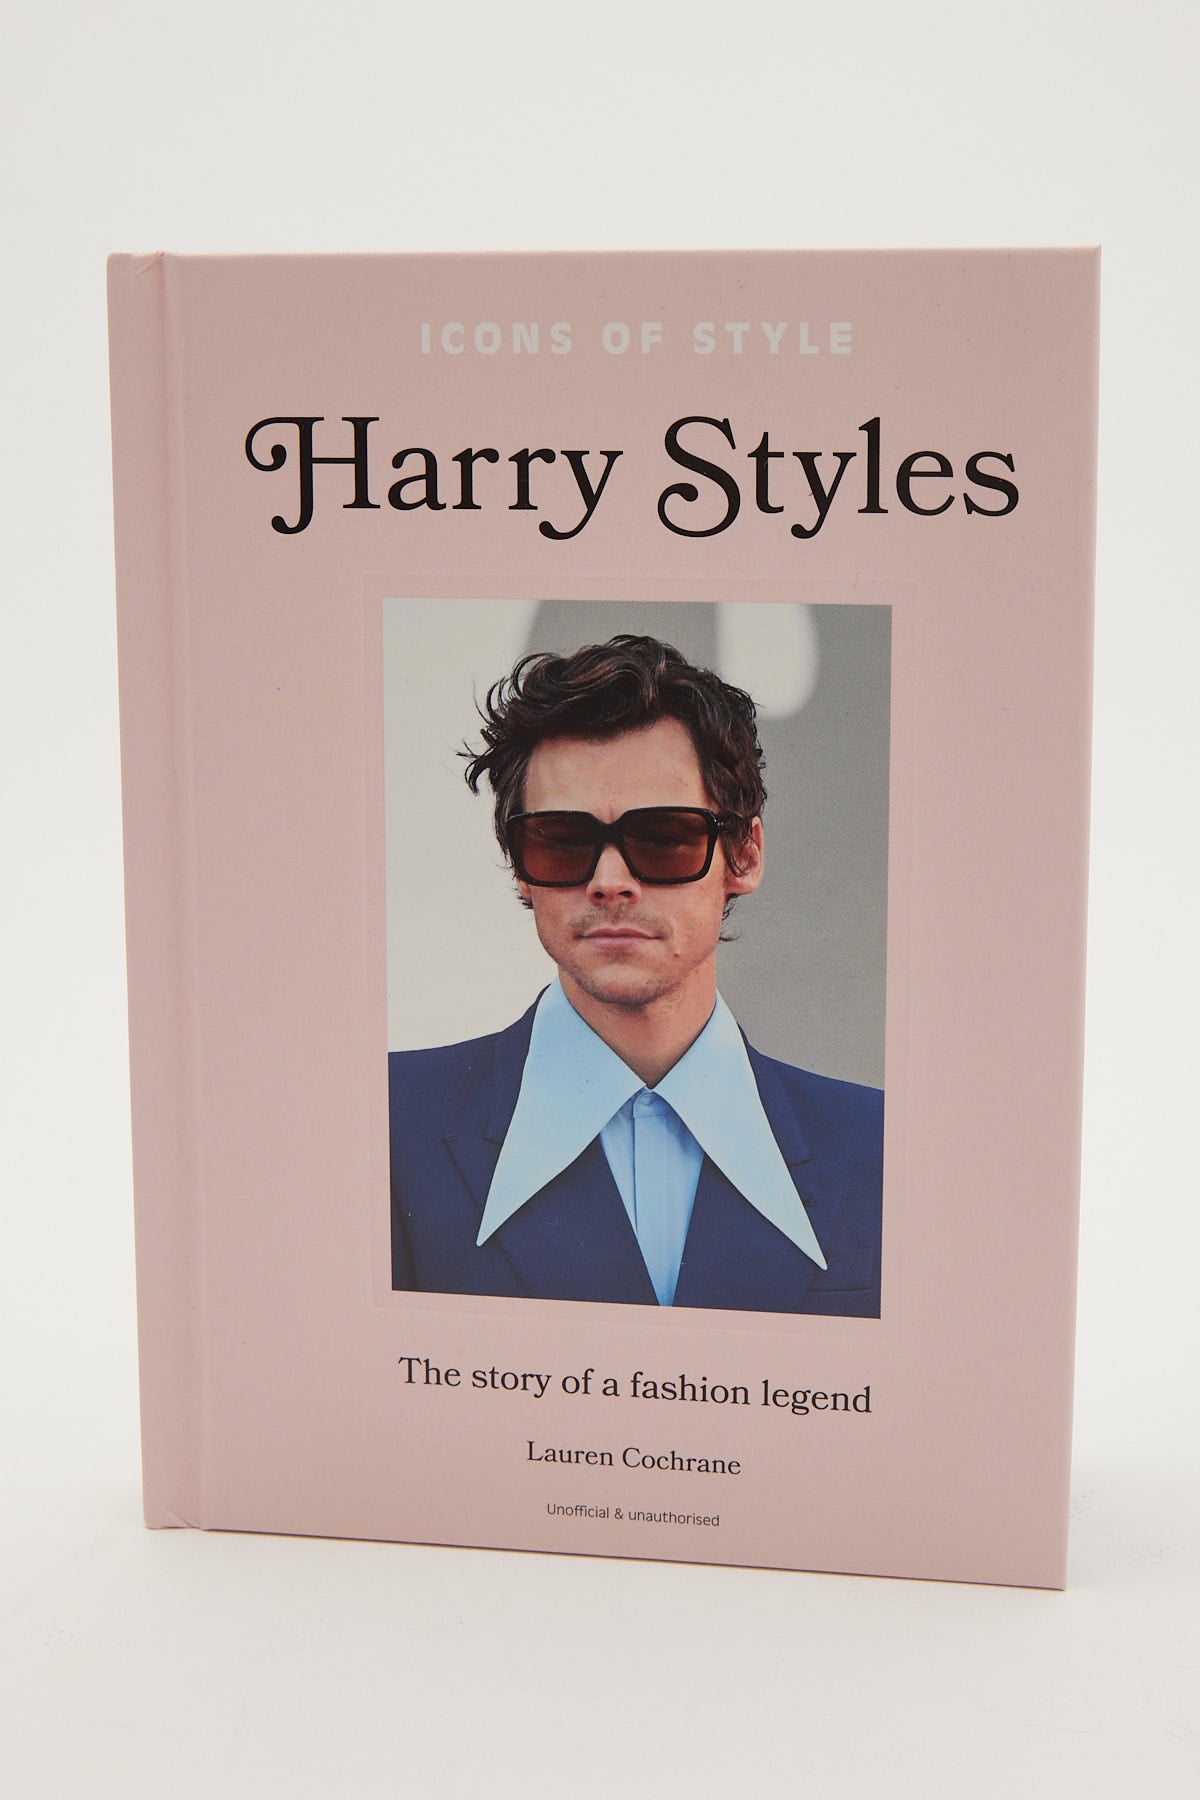 Icons of Style: Harry Styles Multi